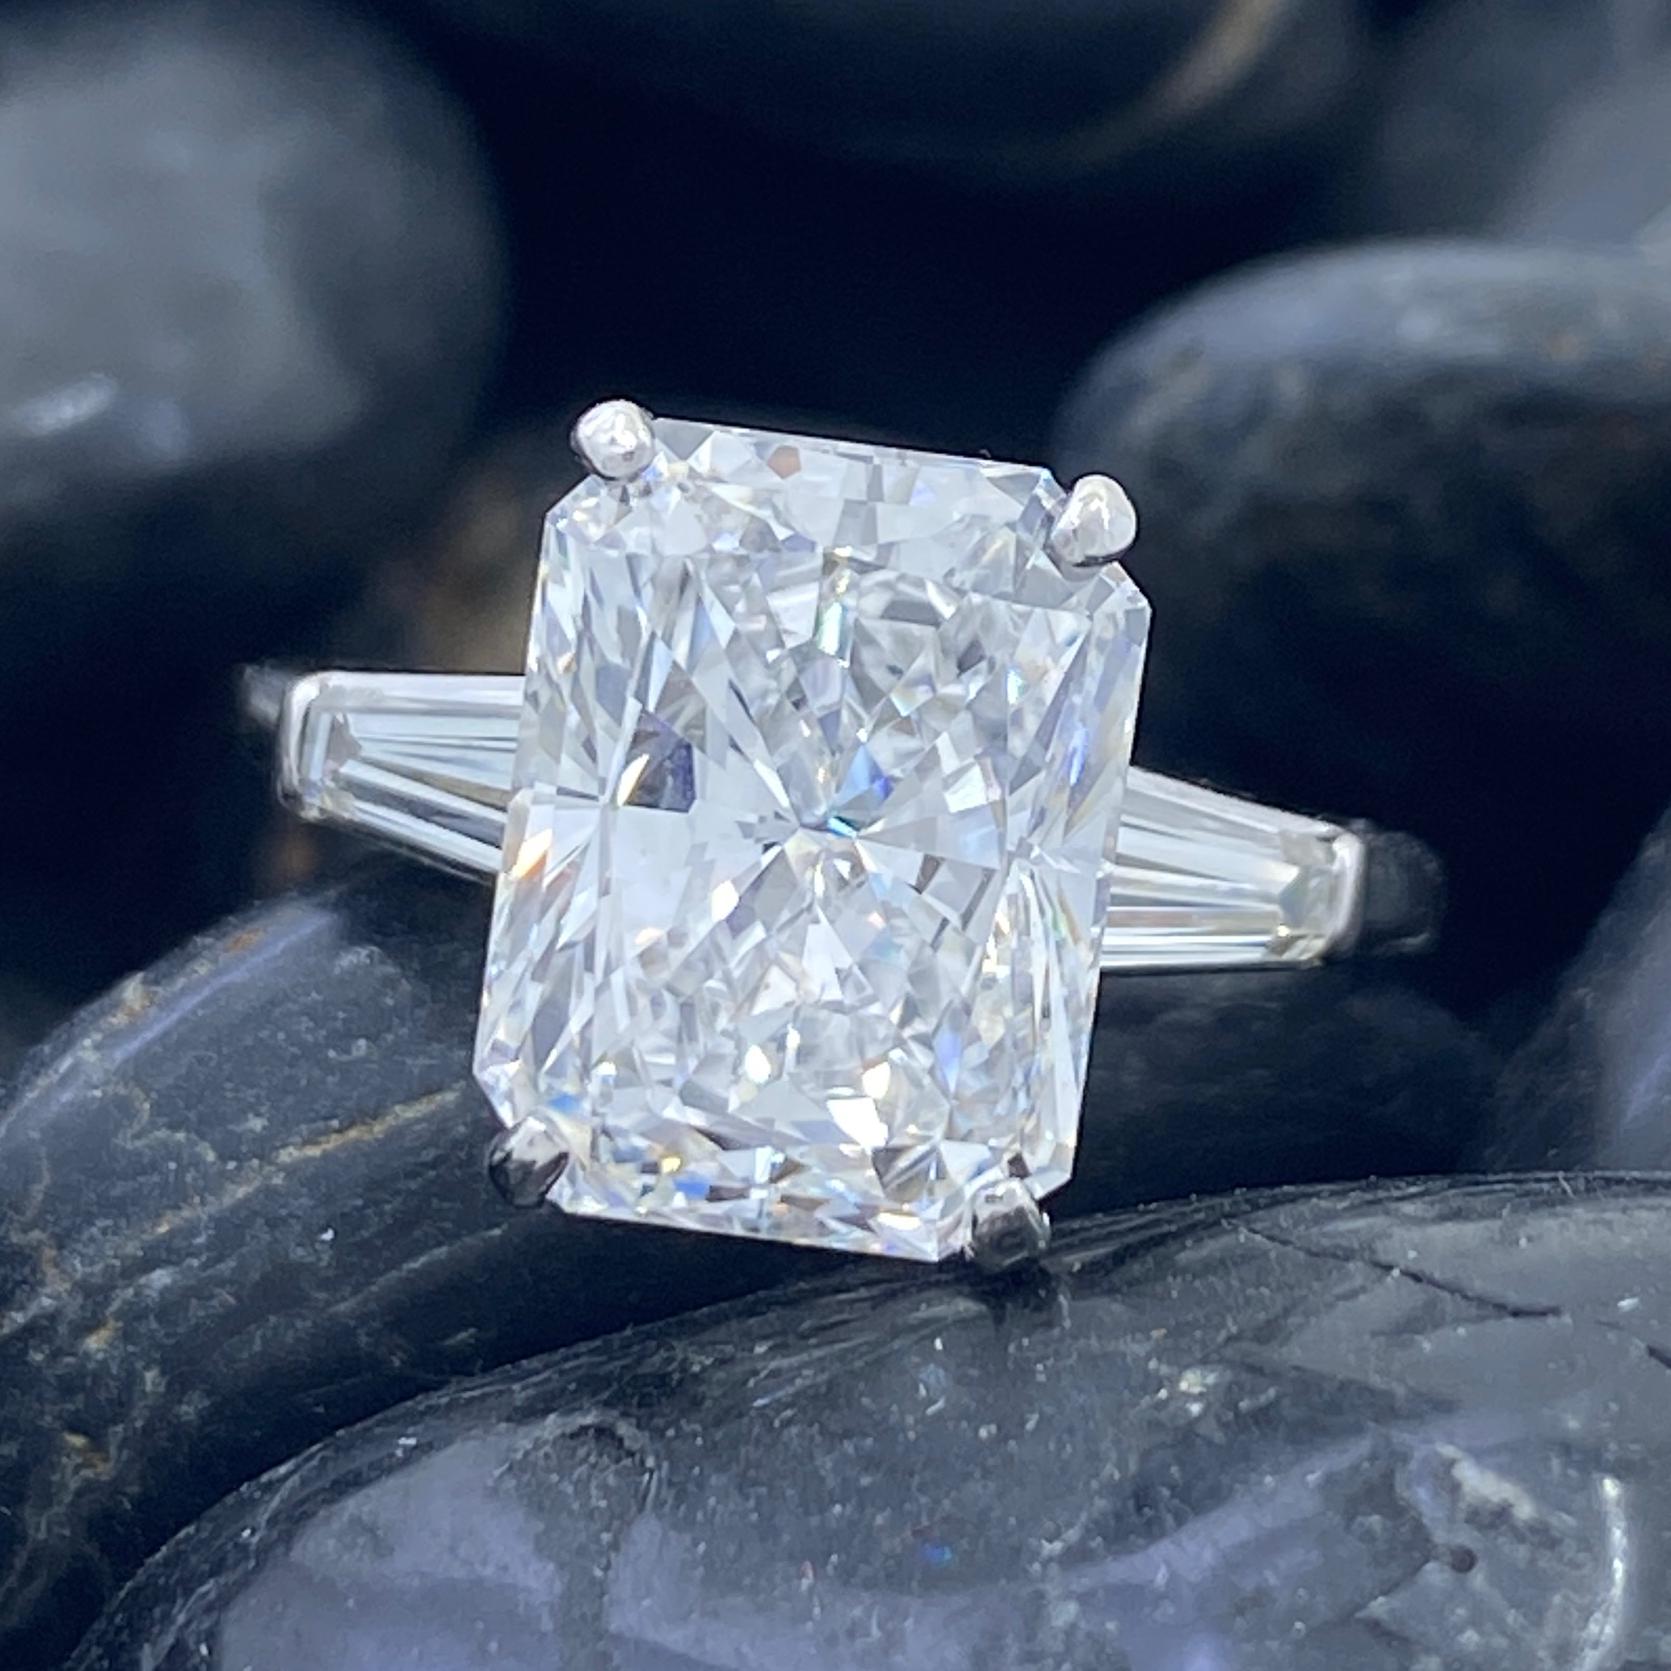 This magnificent ring features a nearly perfect, Radiant-cut white diamond, GIA-certified as VVS1 clarity and E color -- nearly flawless and nearly colorless.  In other words, nearly perfect!

We love the combination of a vintage setting with a